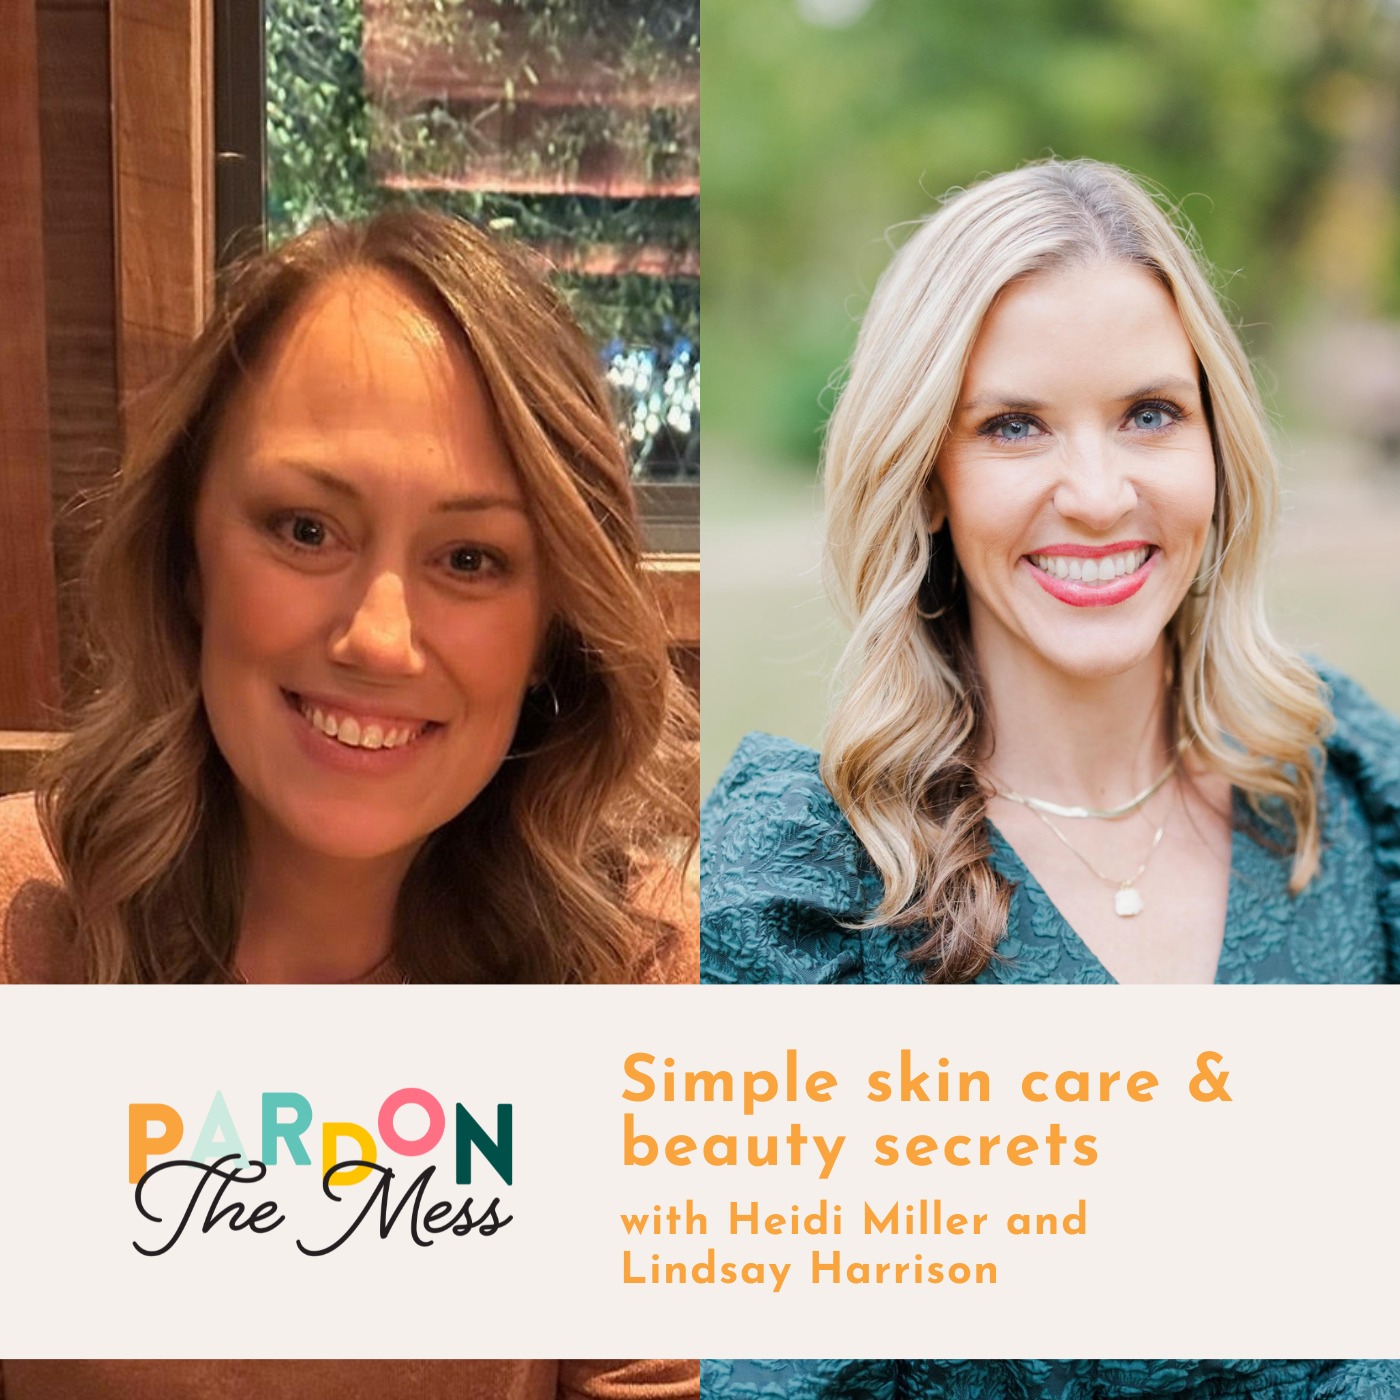 Simple Skin Care & Beauty Secrets with Heidi Miller and Lindsay Harrison